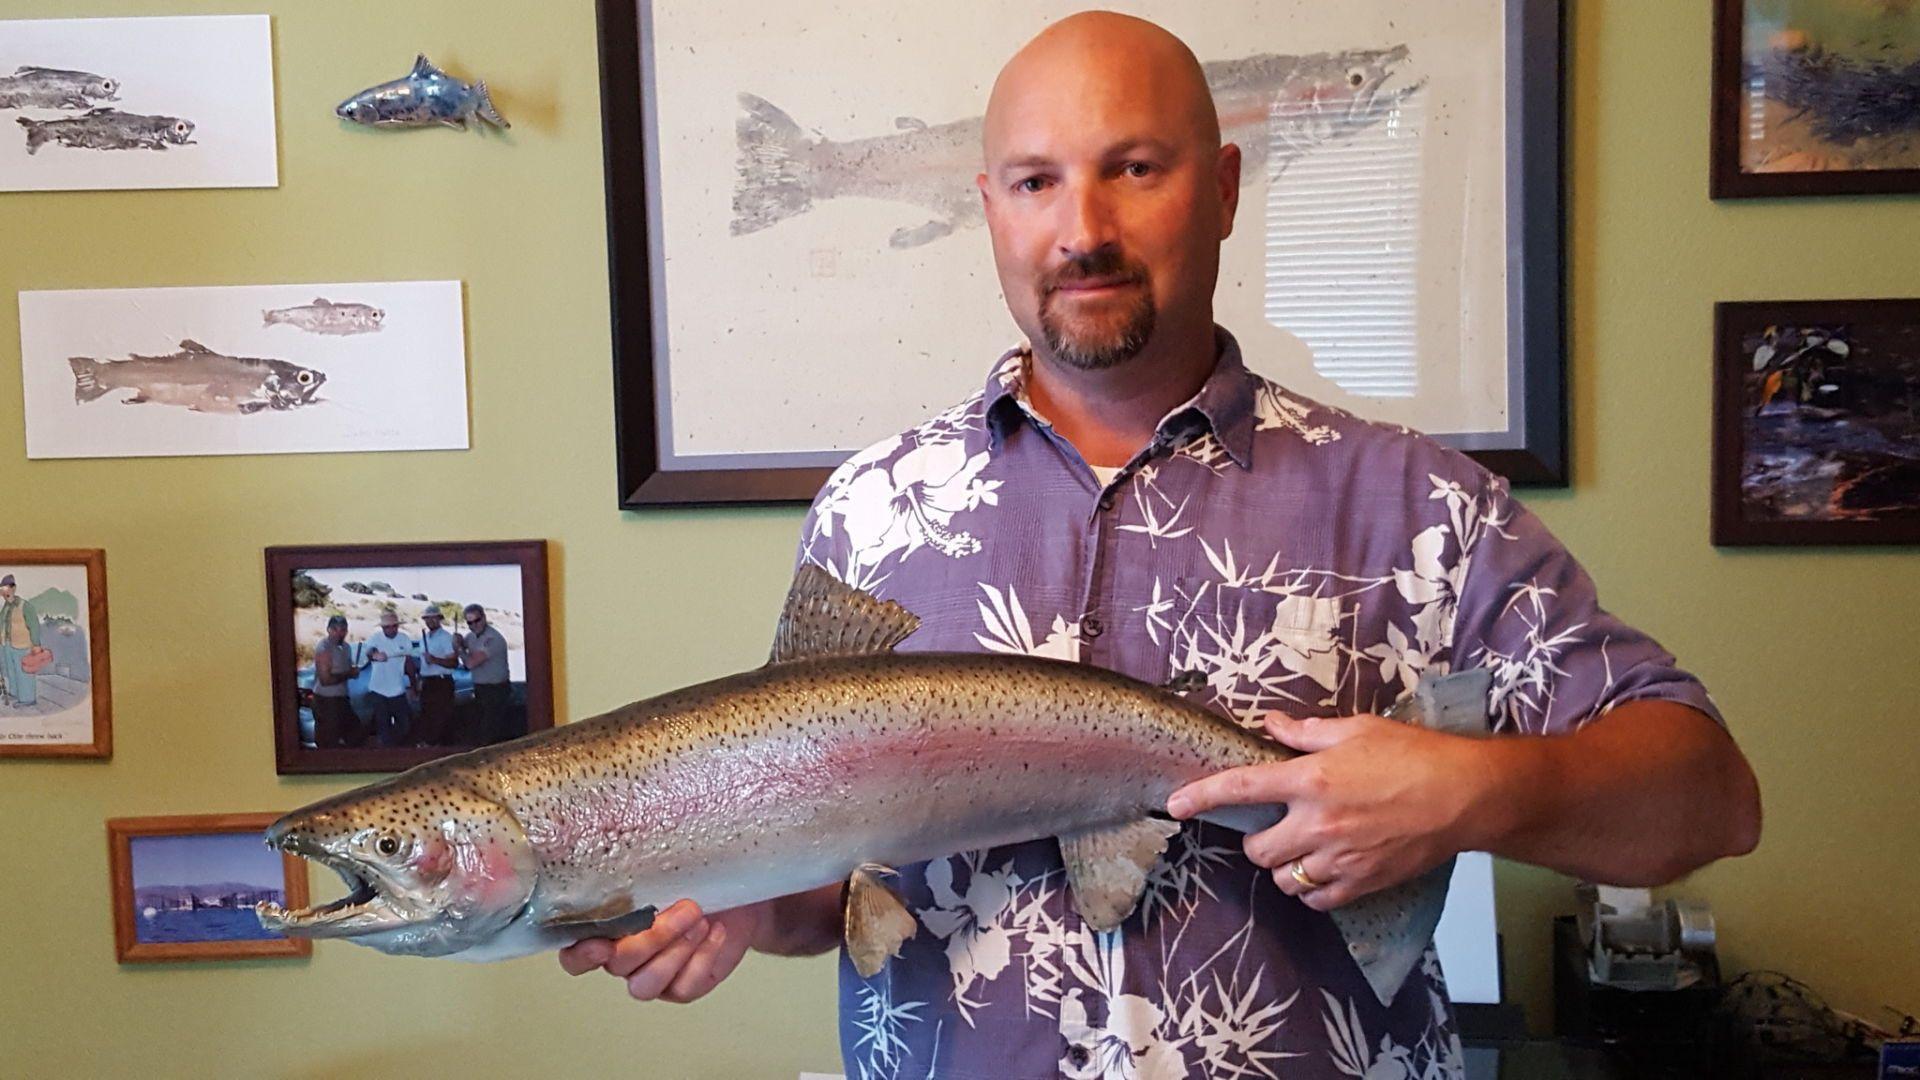 Striving to save the local steelhead